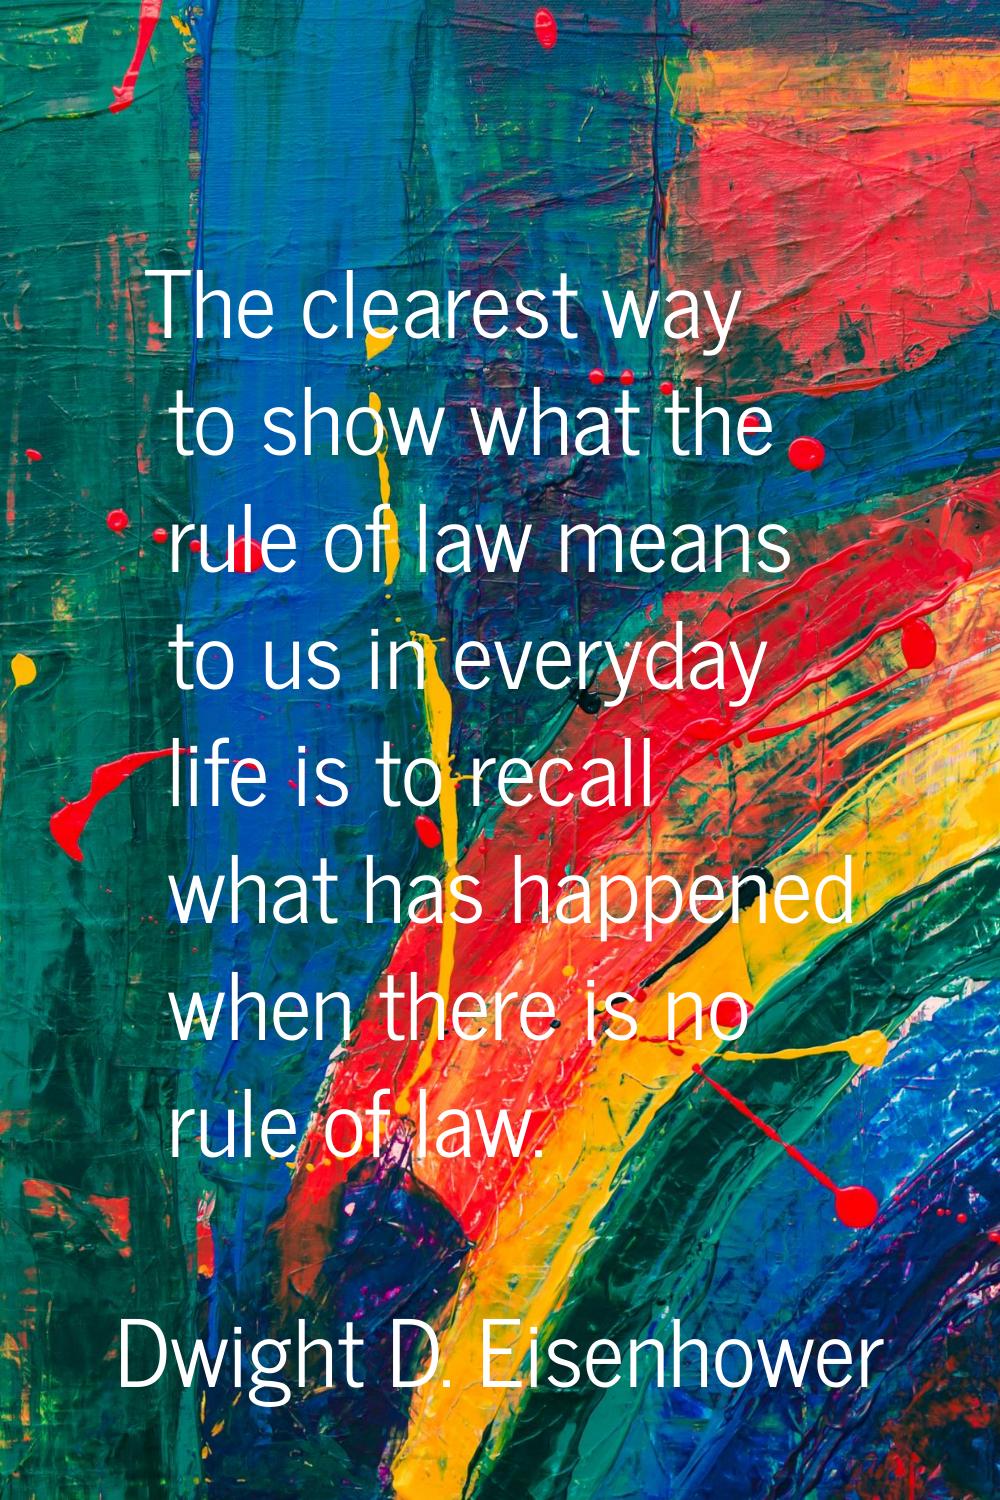 The clearest way to show what the rule of law means to us in everyday life is to recall what has ha